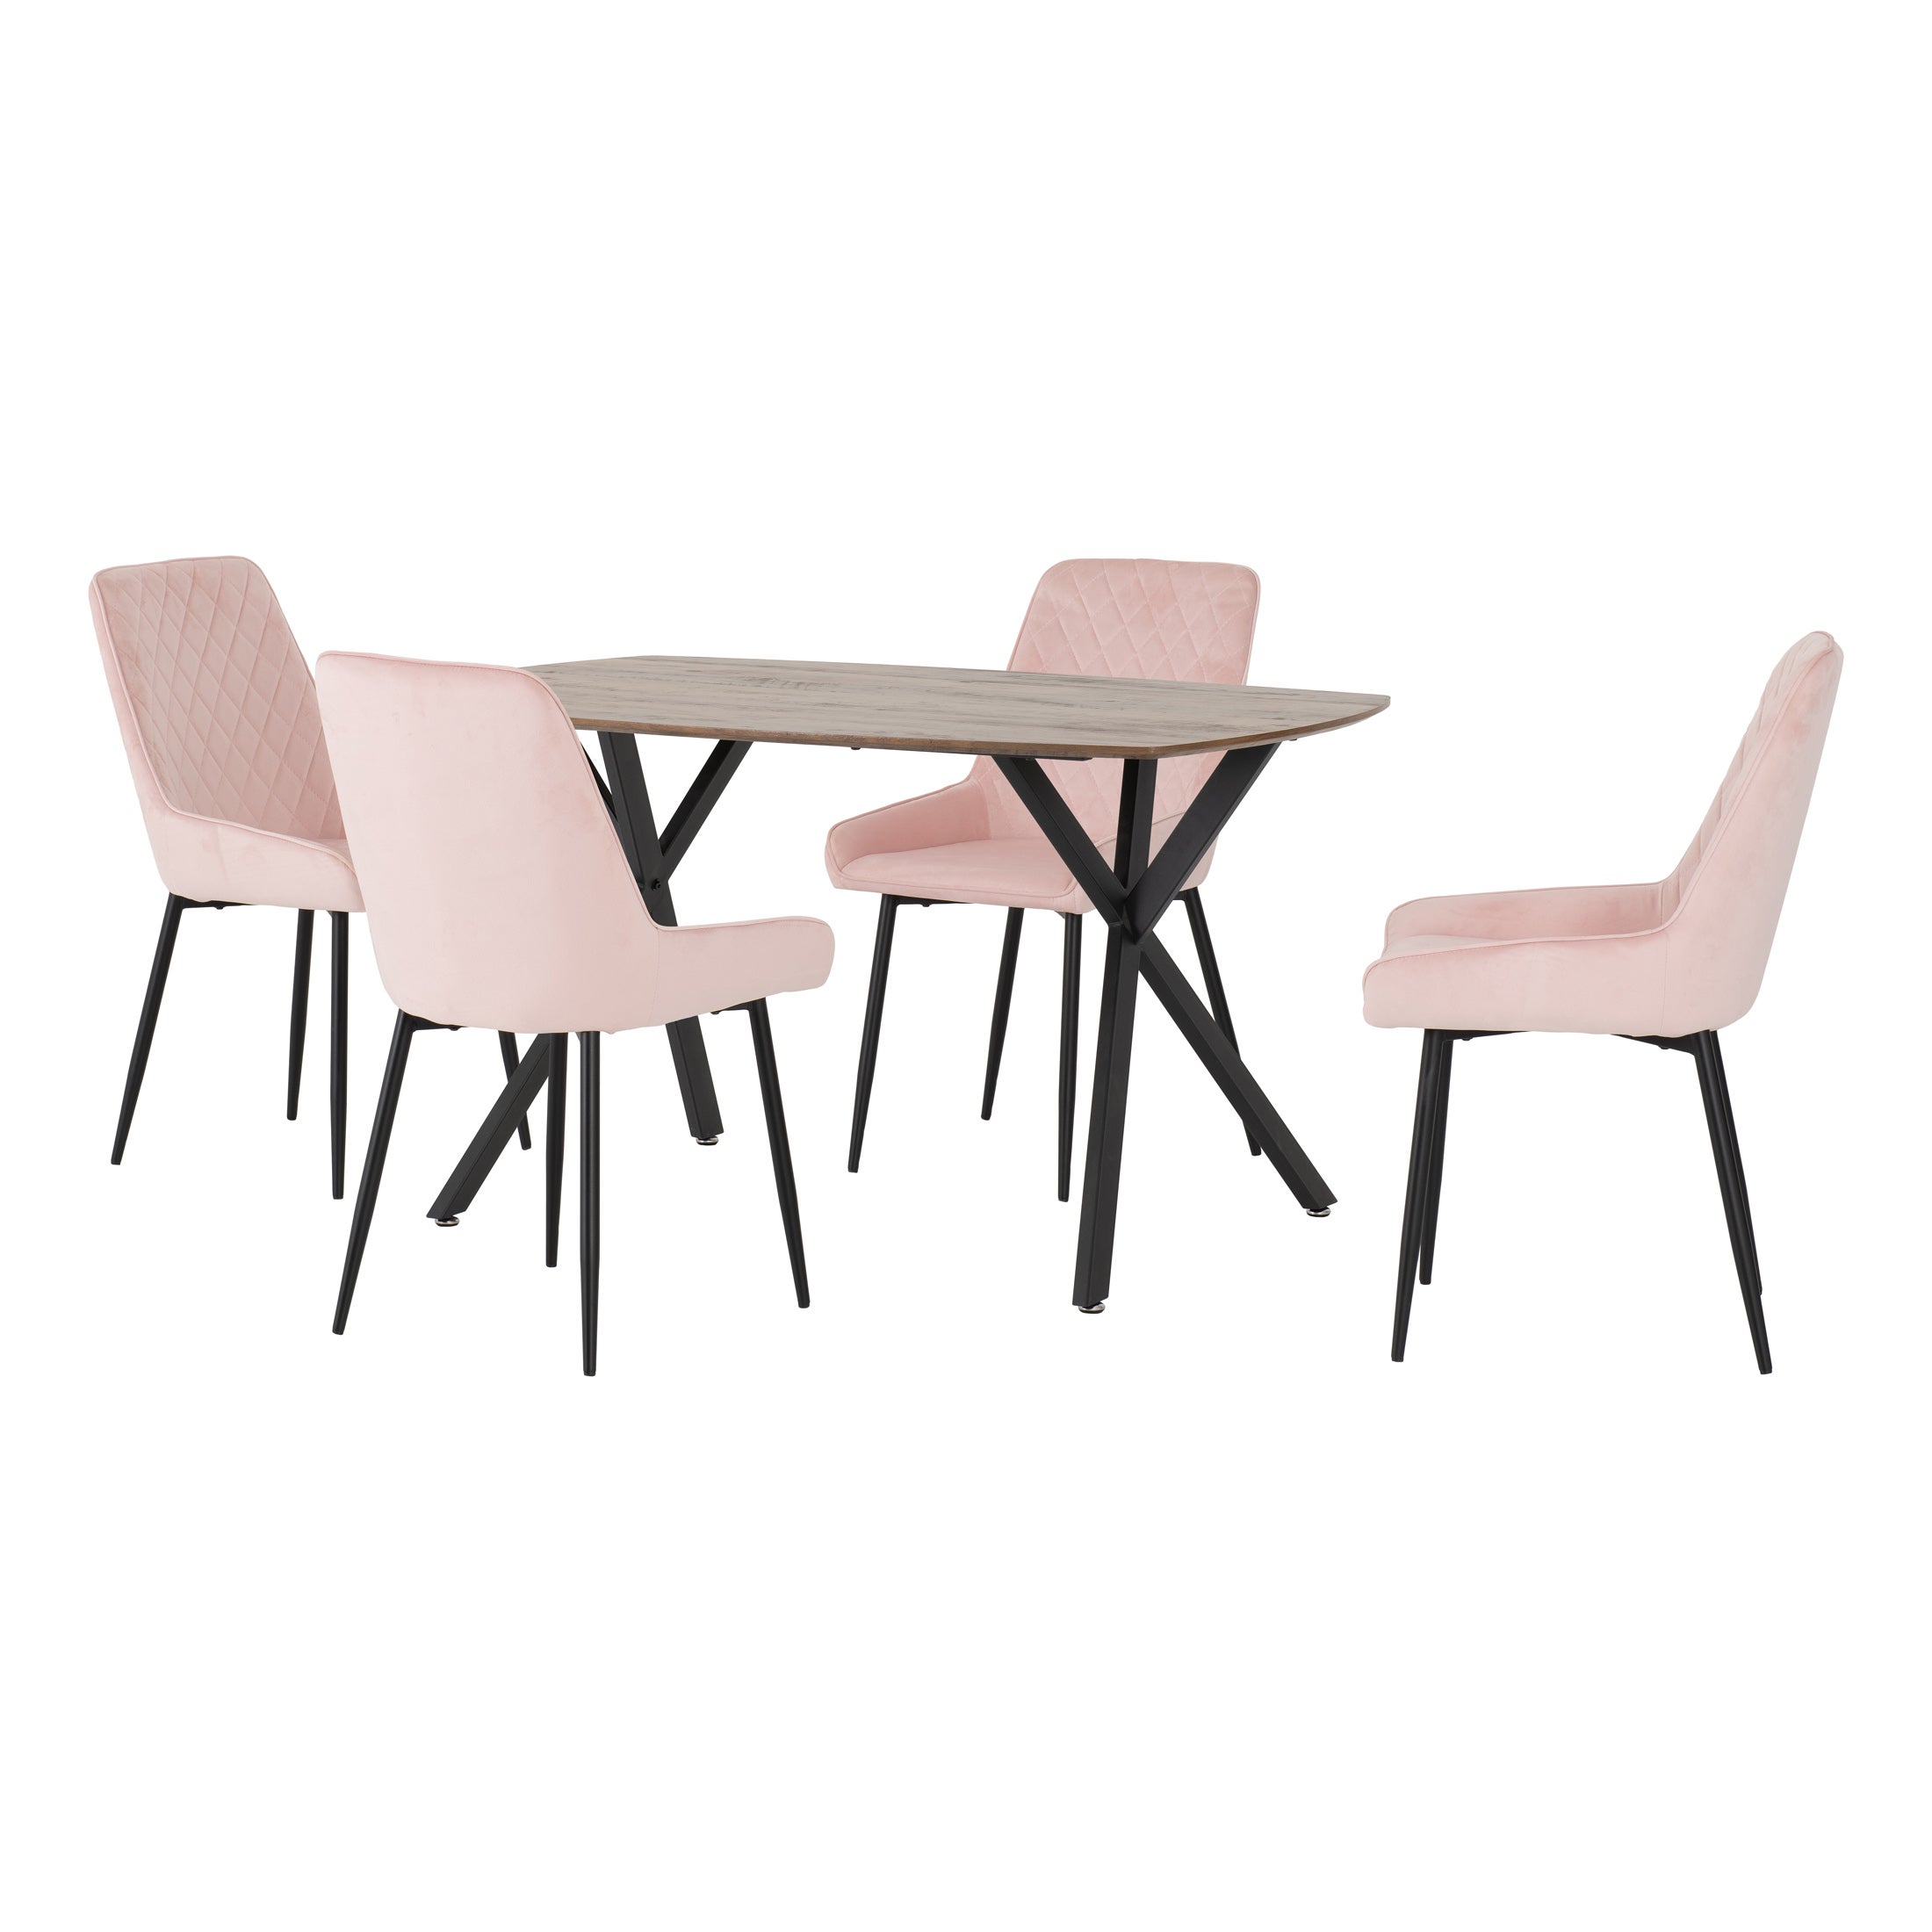 Athens Rectangular Dining Table with 4 Avery Chairs, Oak Effect Pink